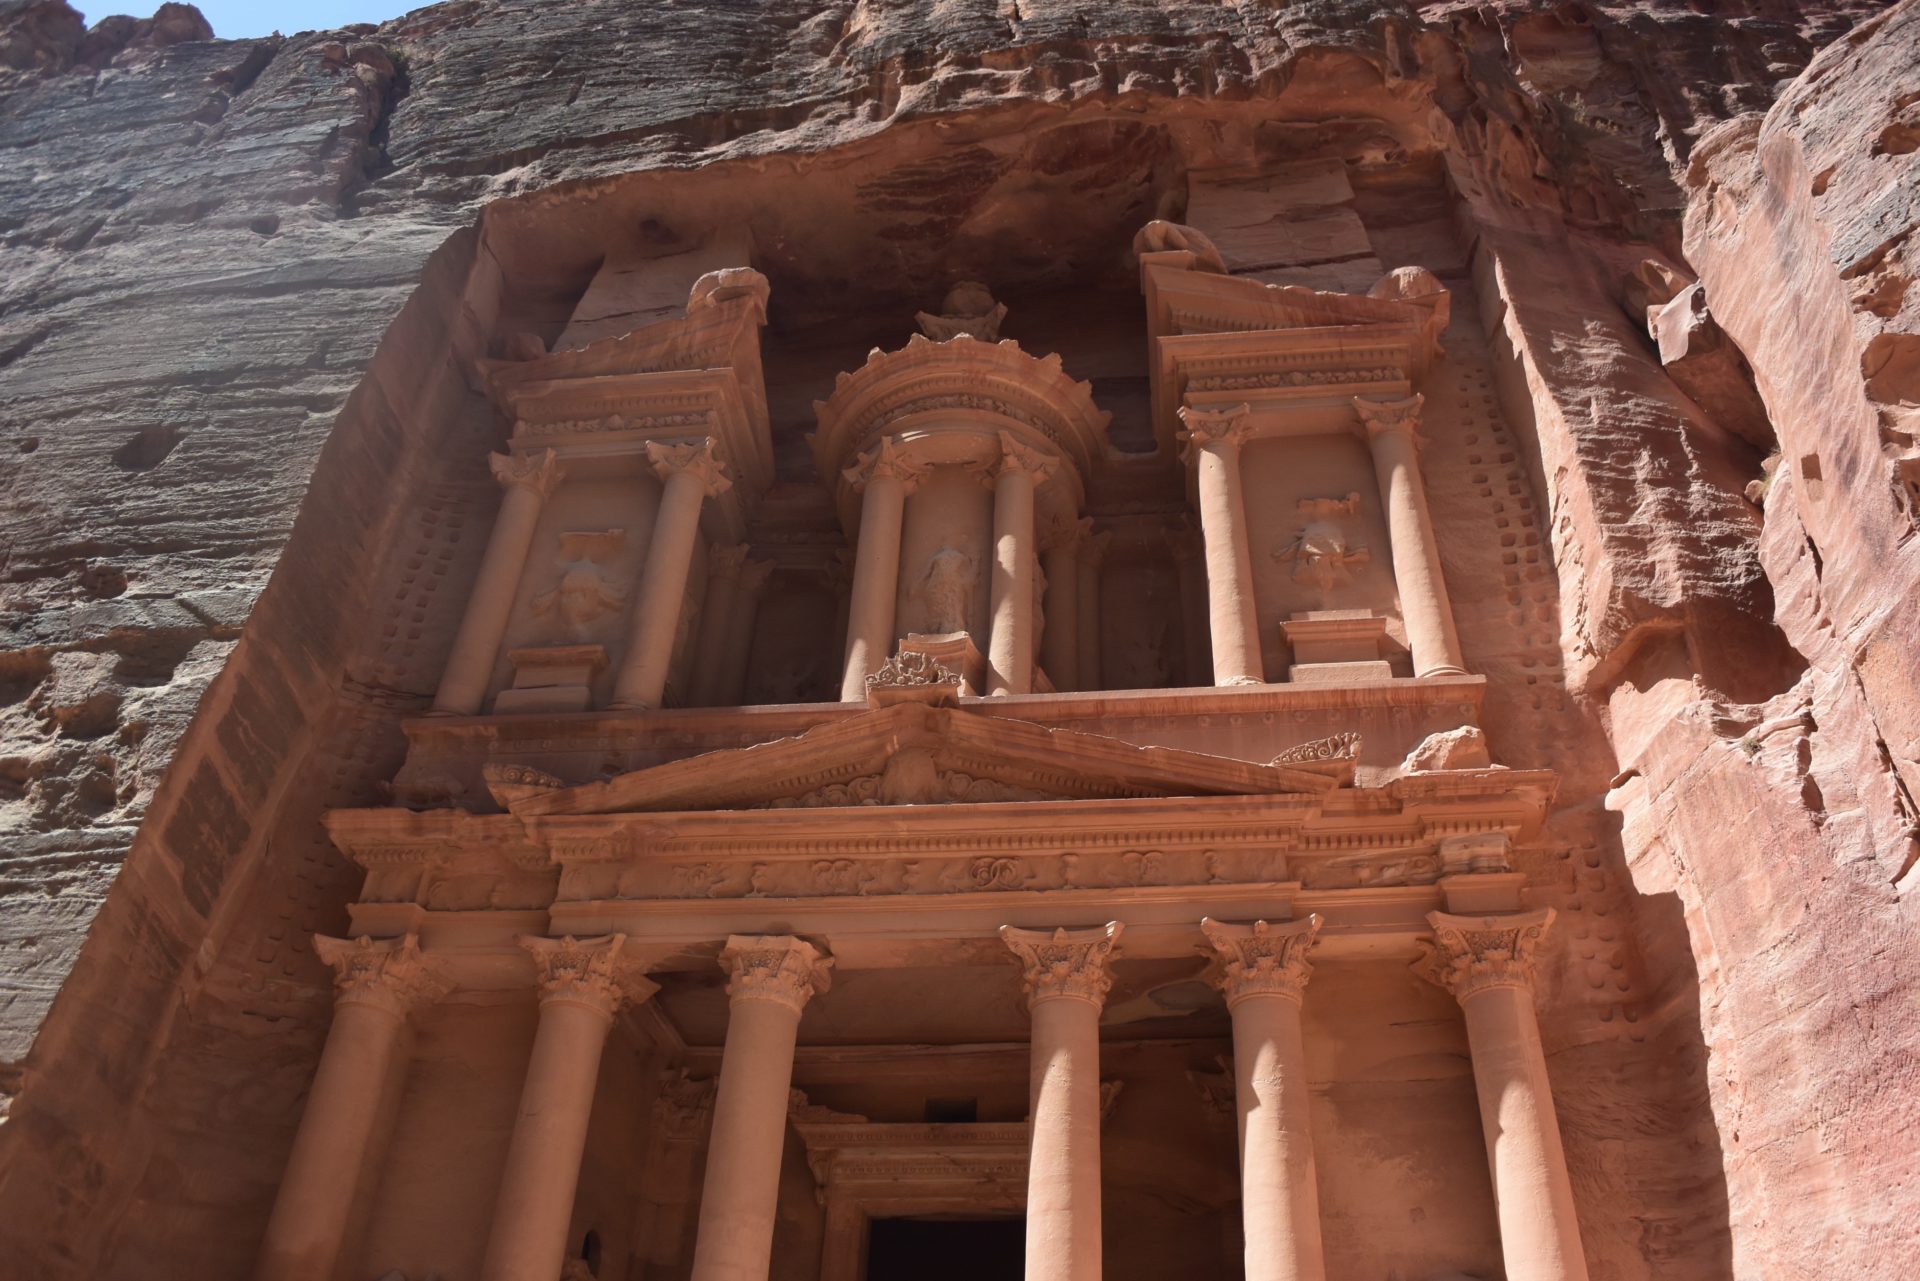 Petra with pillars in a rock